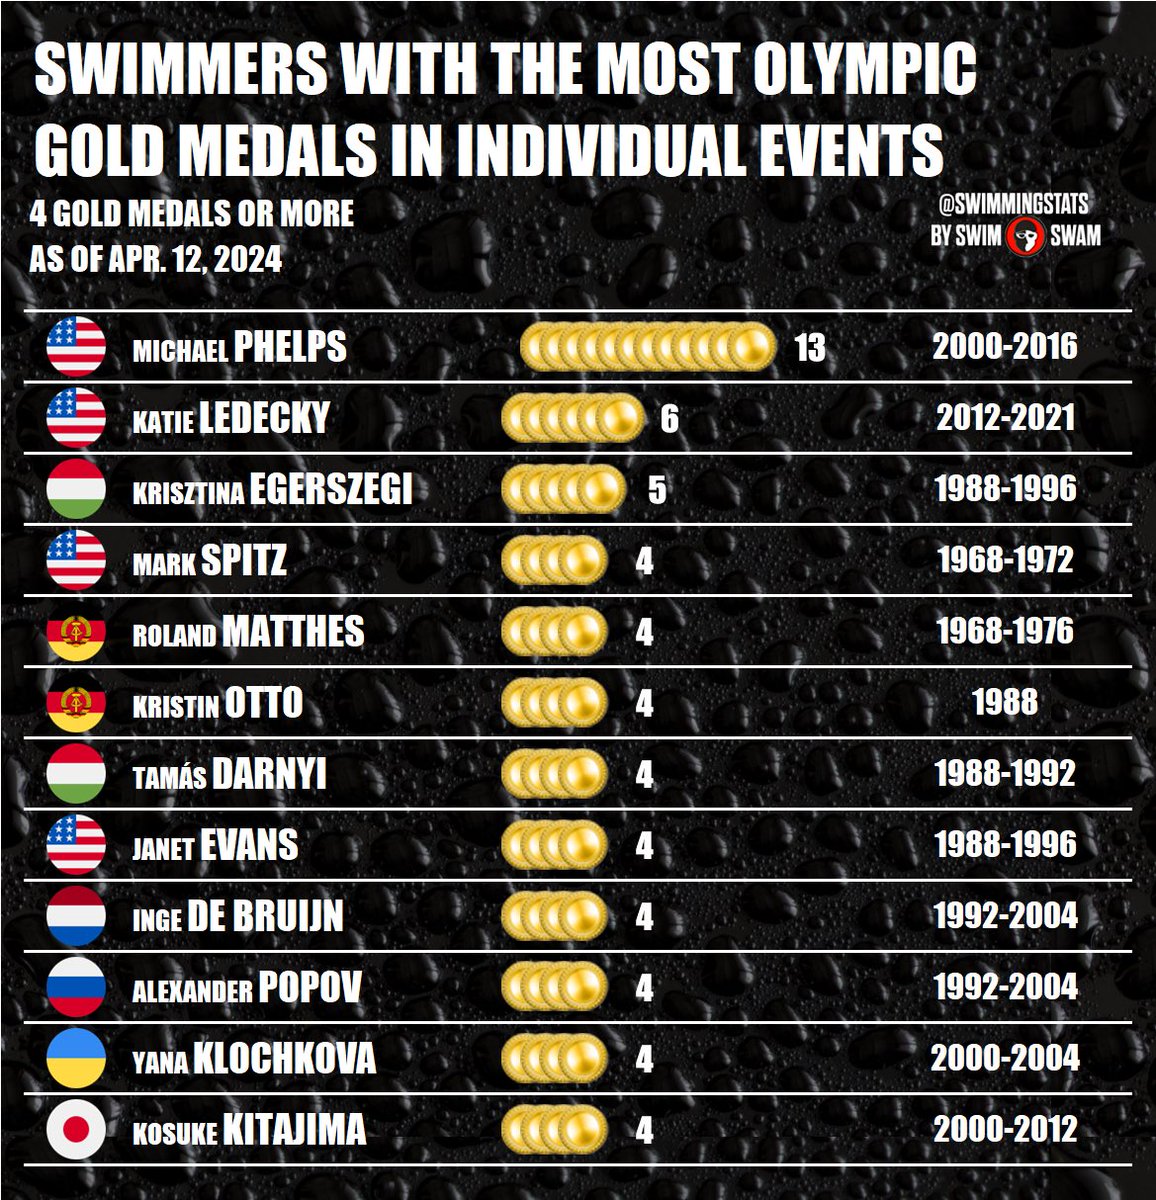 These are the swimmers with the most Olympic gold medals in individual events. Who is going to be the next swimmer to join this list?